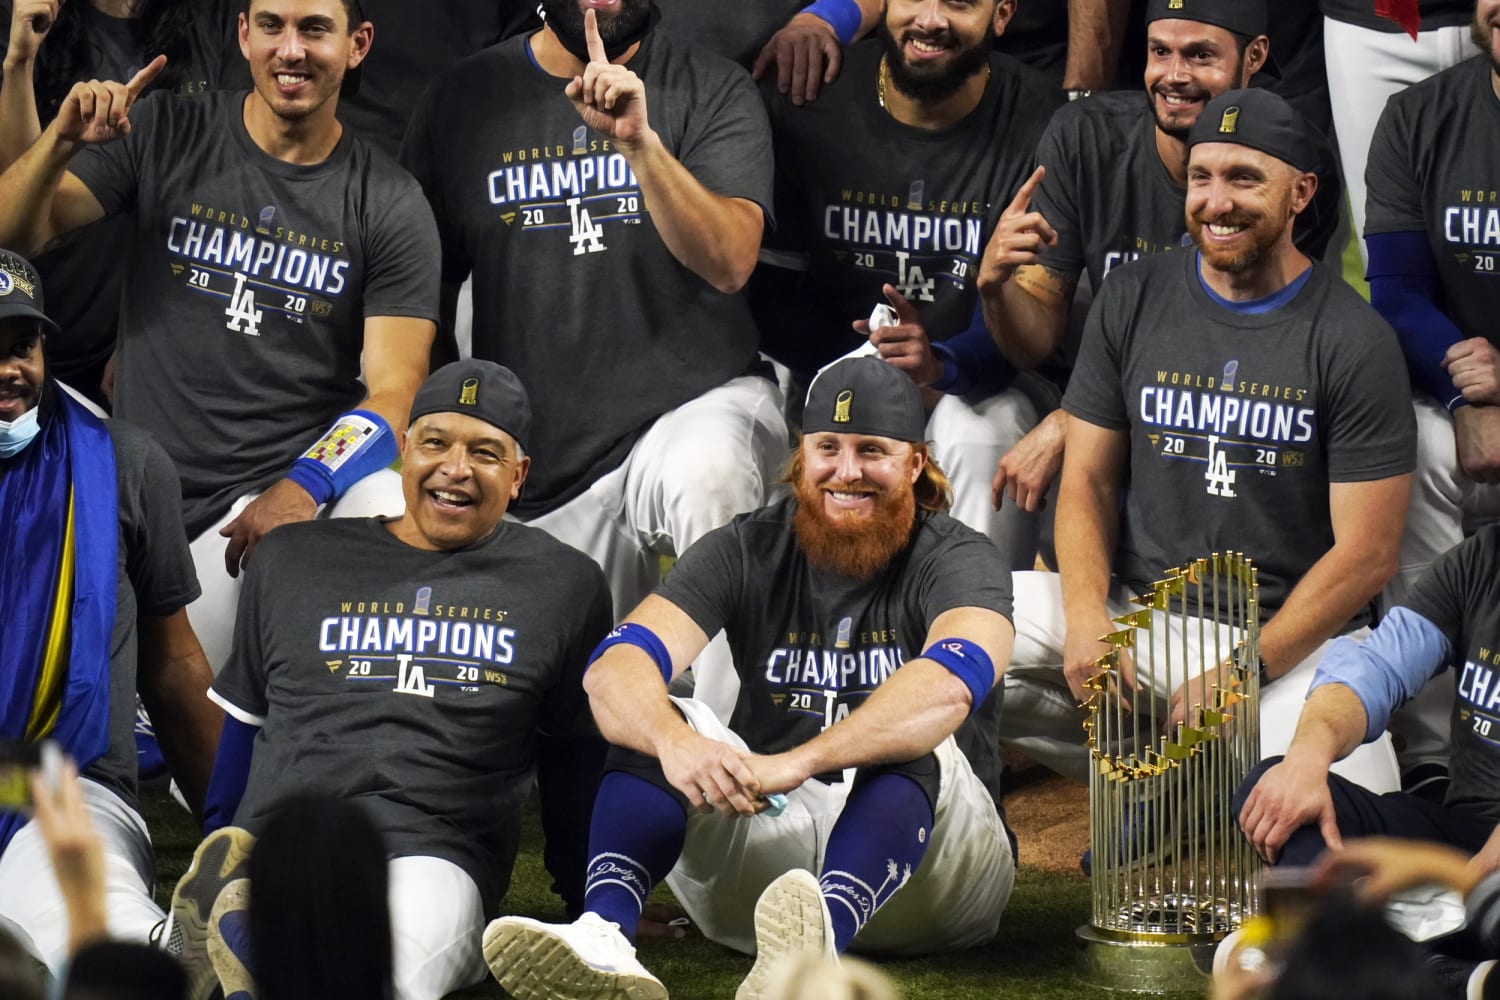 In wide-ranging Q&A, Justin Turner reflects on his career, his